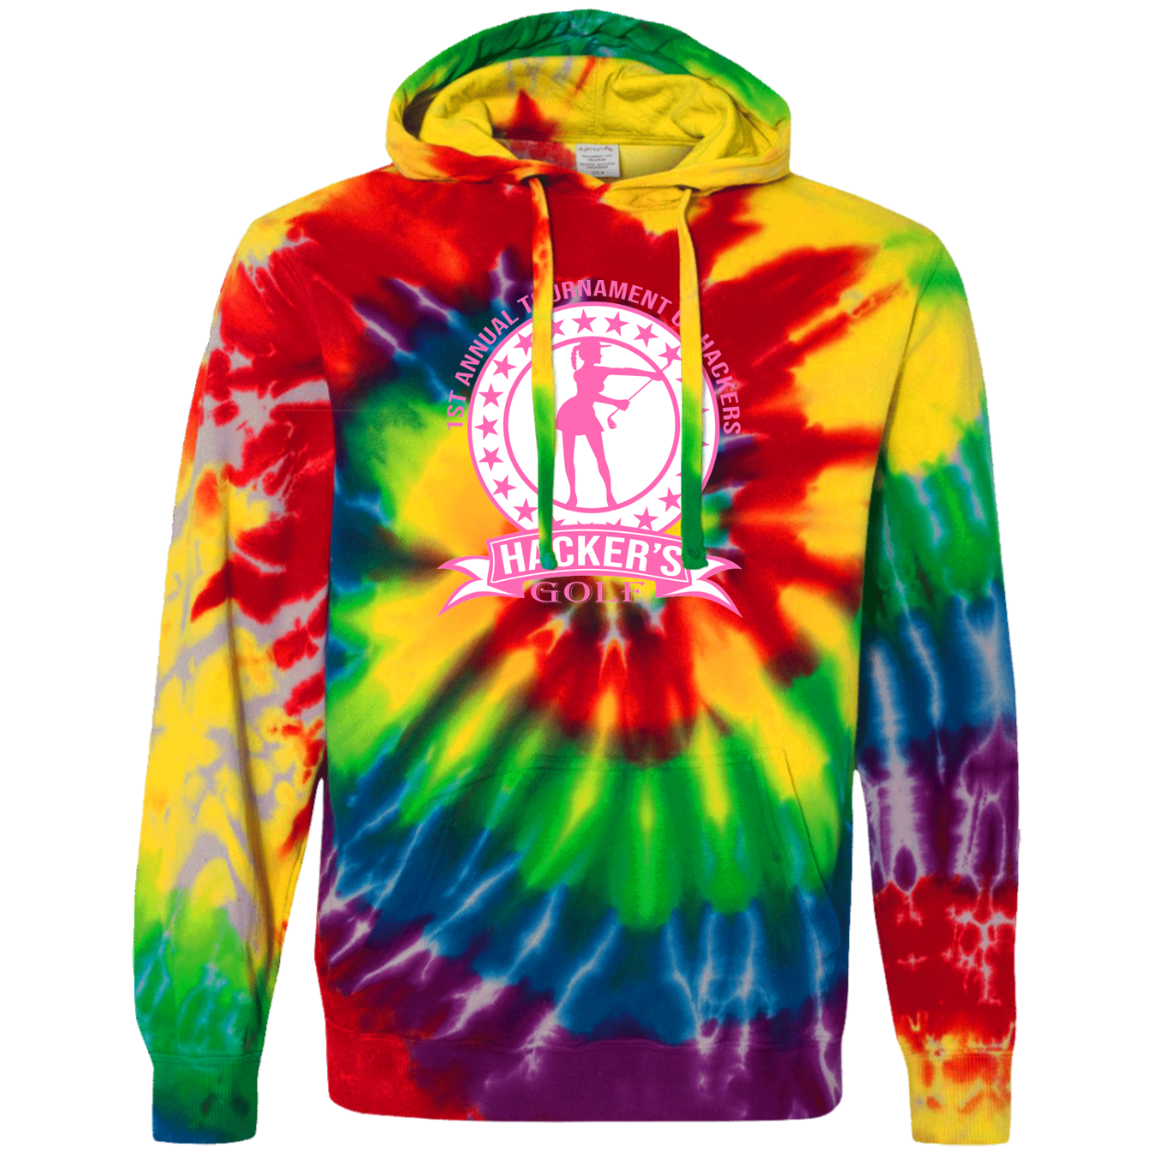 ZZZ#20 OPG Custom Design. 1st Annual Hackers Golf Tournament. Ladies Edition. Tie-Dyed Pullover Hoodie